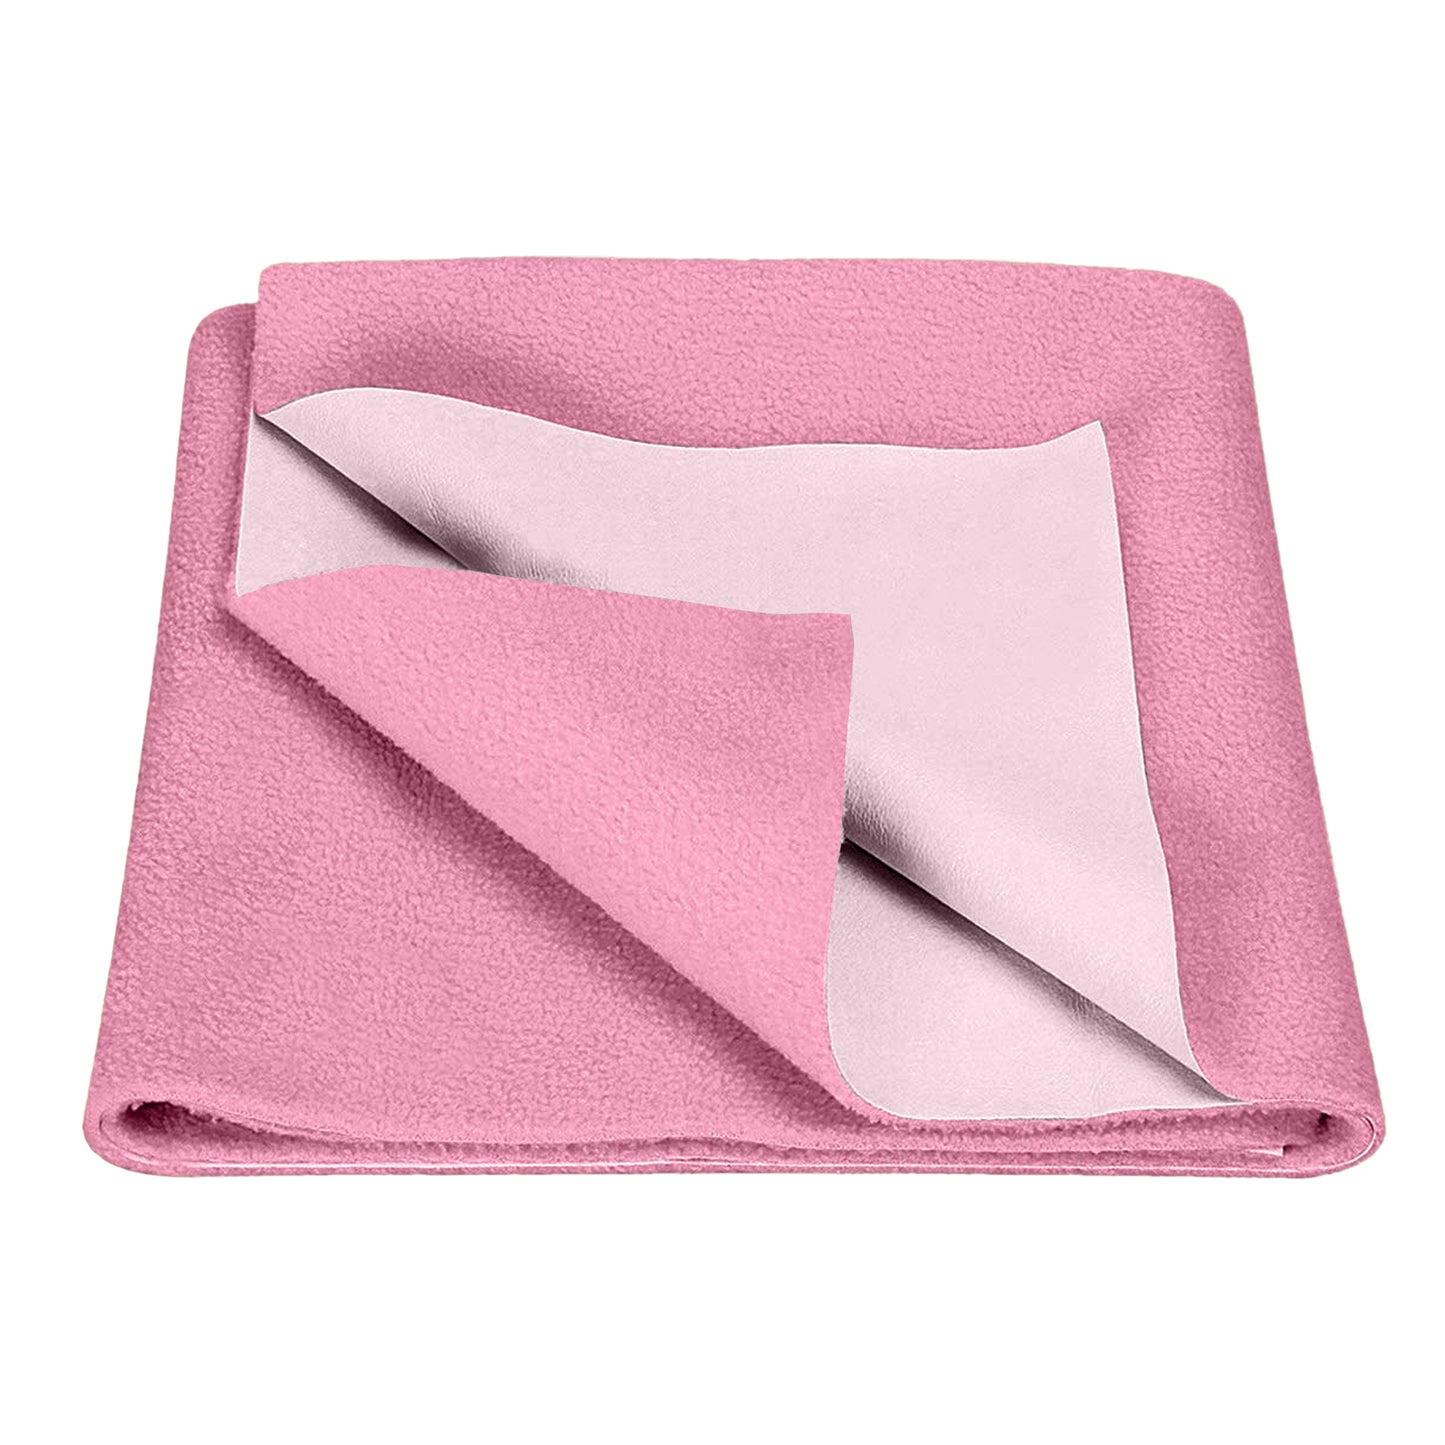 Waterproof Quick Dry Protector Sheet, Baby Bed Protector (140 X 100 CM), Pack of 1 -PINK